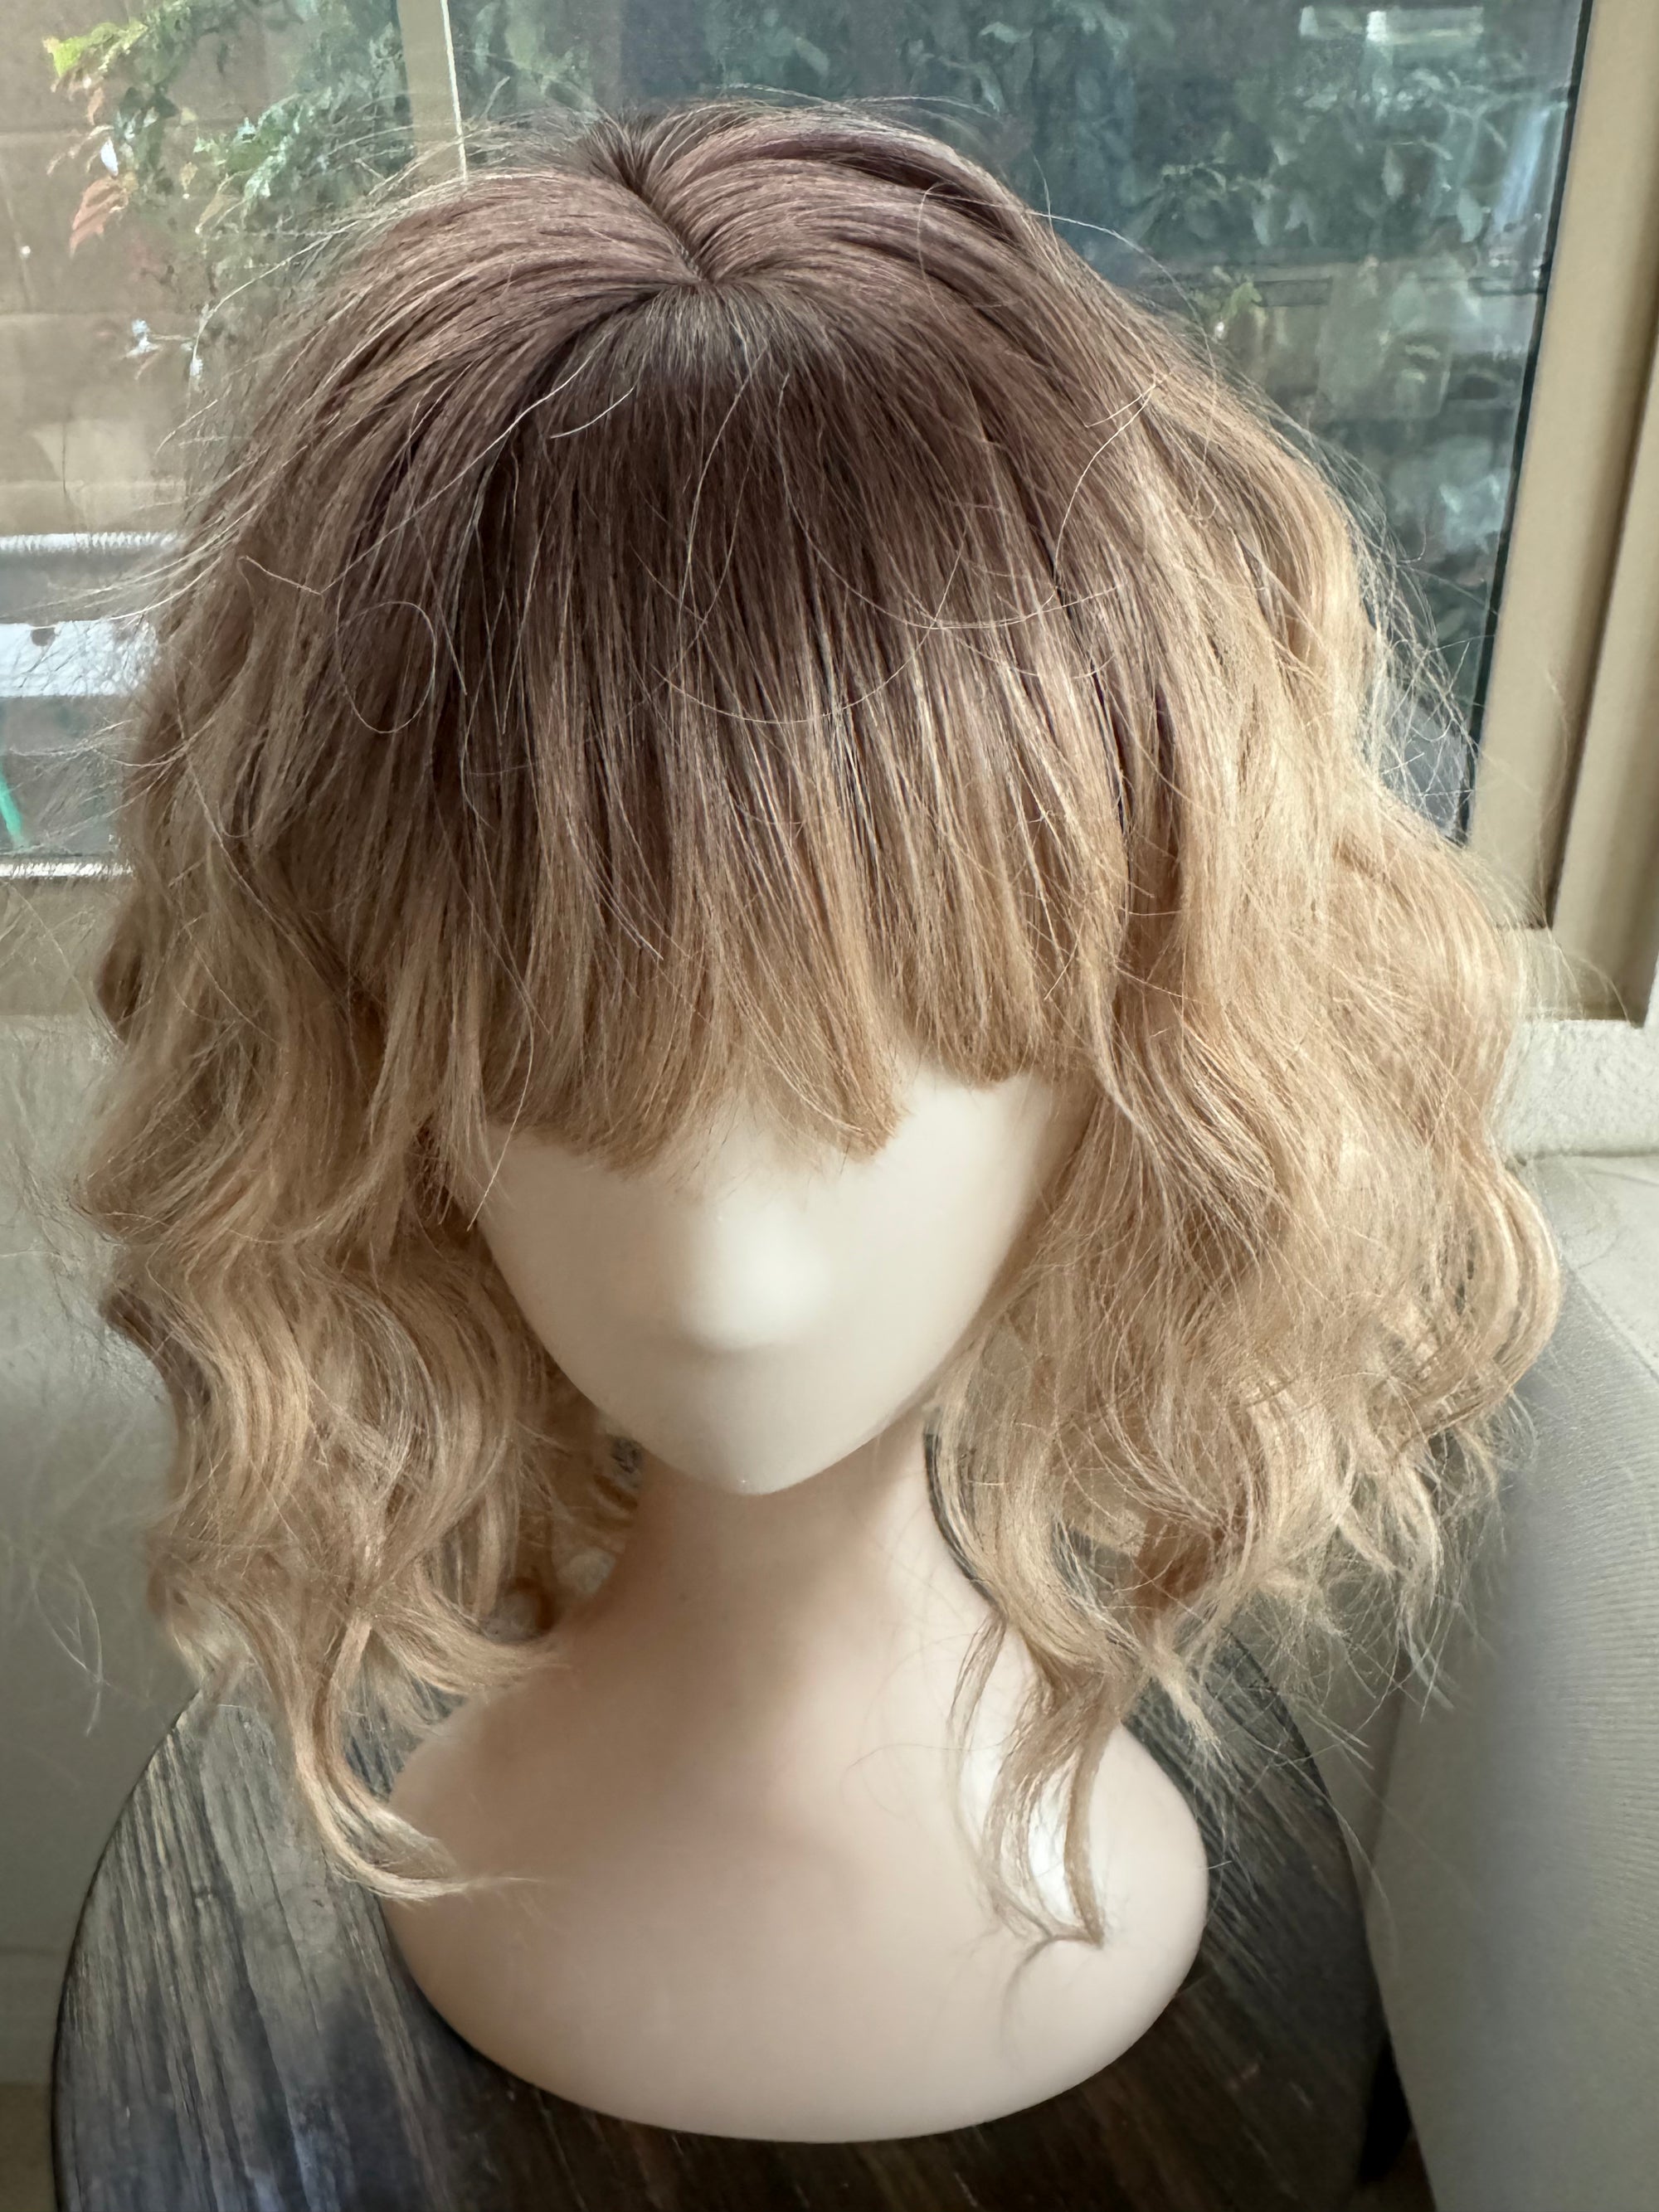 Tillstyle short ombre blonde wig with bangs bob wigs for women loose body wave air bangs